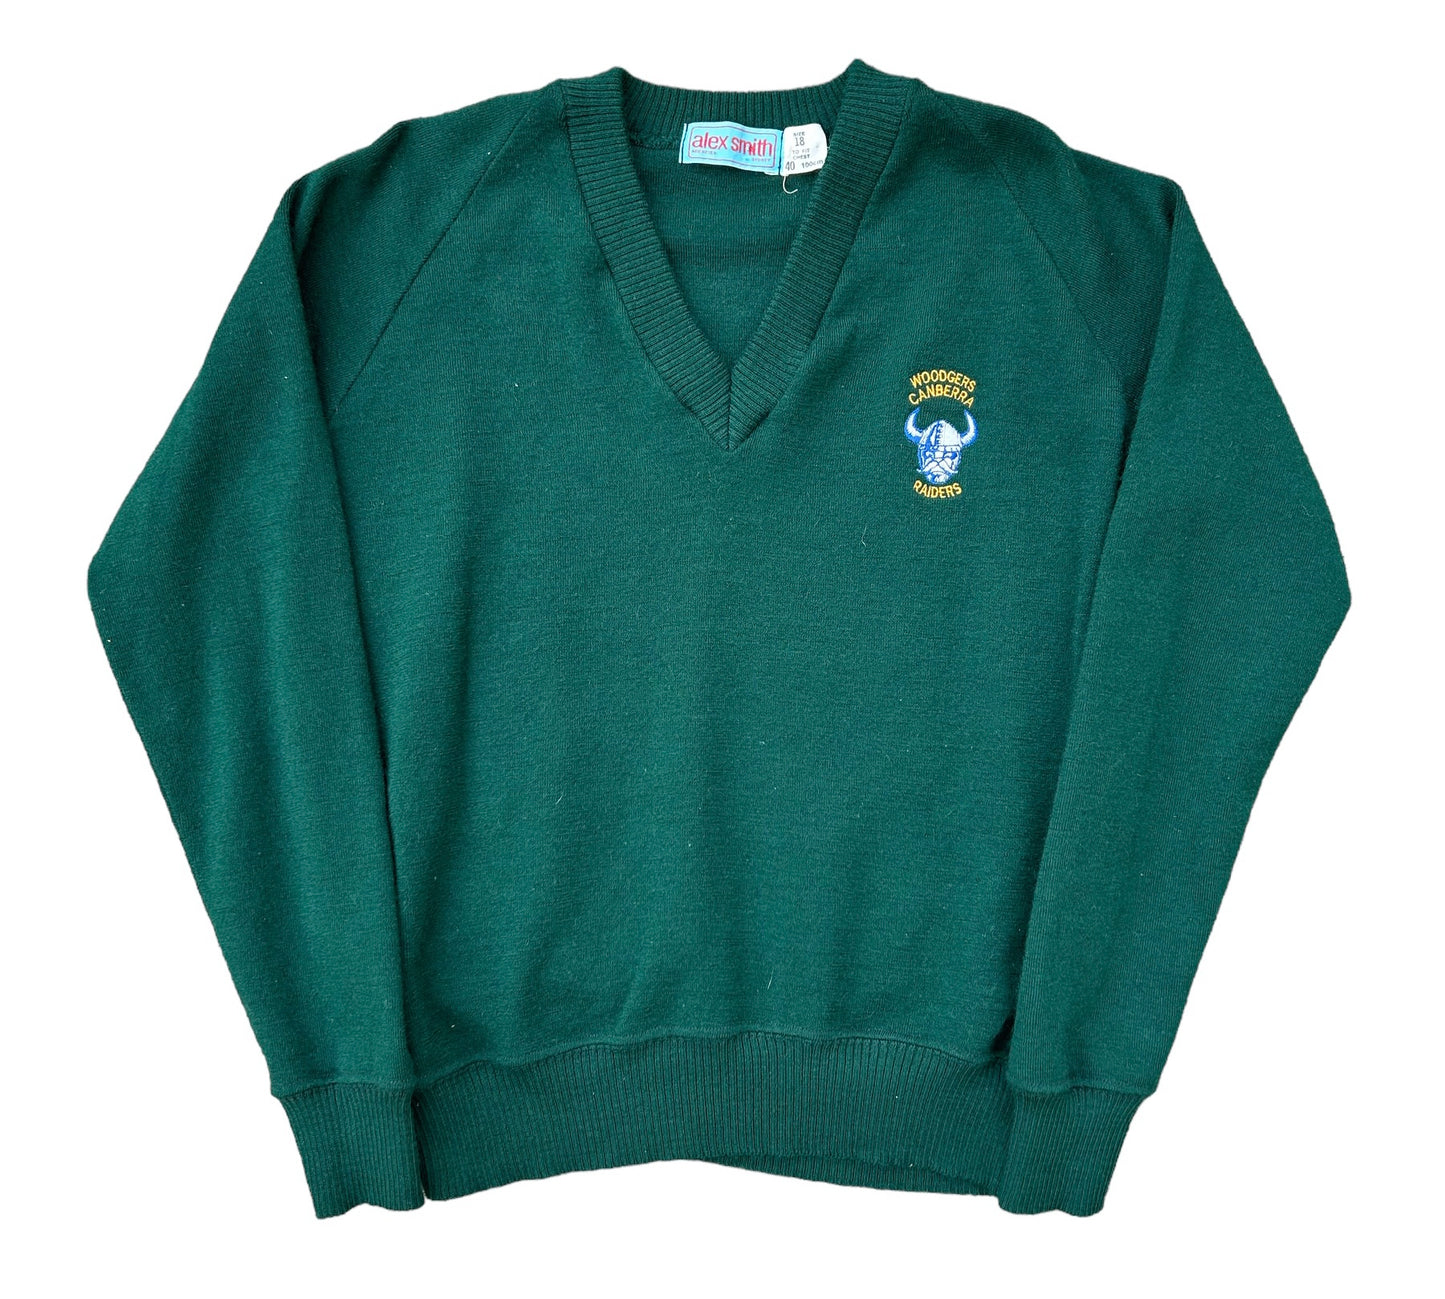 1989 Canberra Raiders Knit Sweater